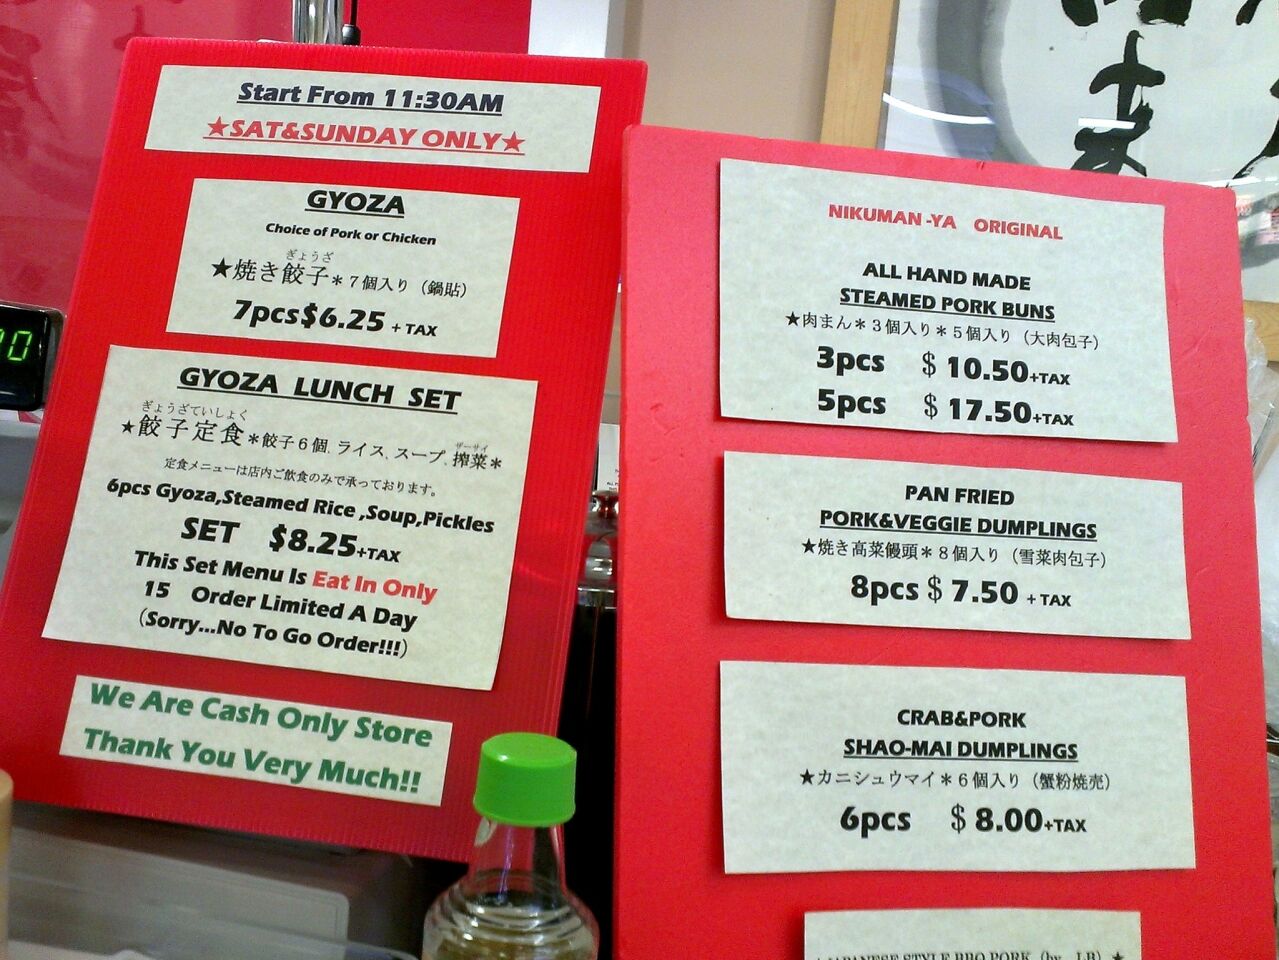 Gyoza is available at the King of Gyoza on Saturdays and Sundays, starting at 11:30 a.m. Cash only.